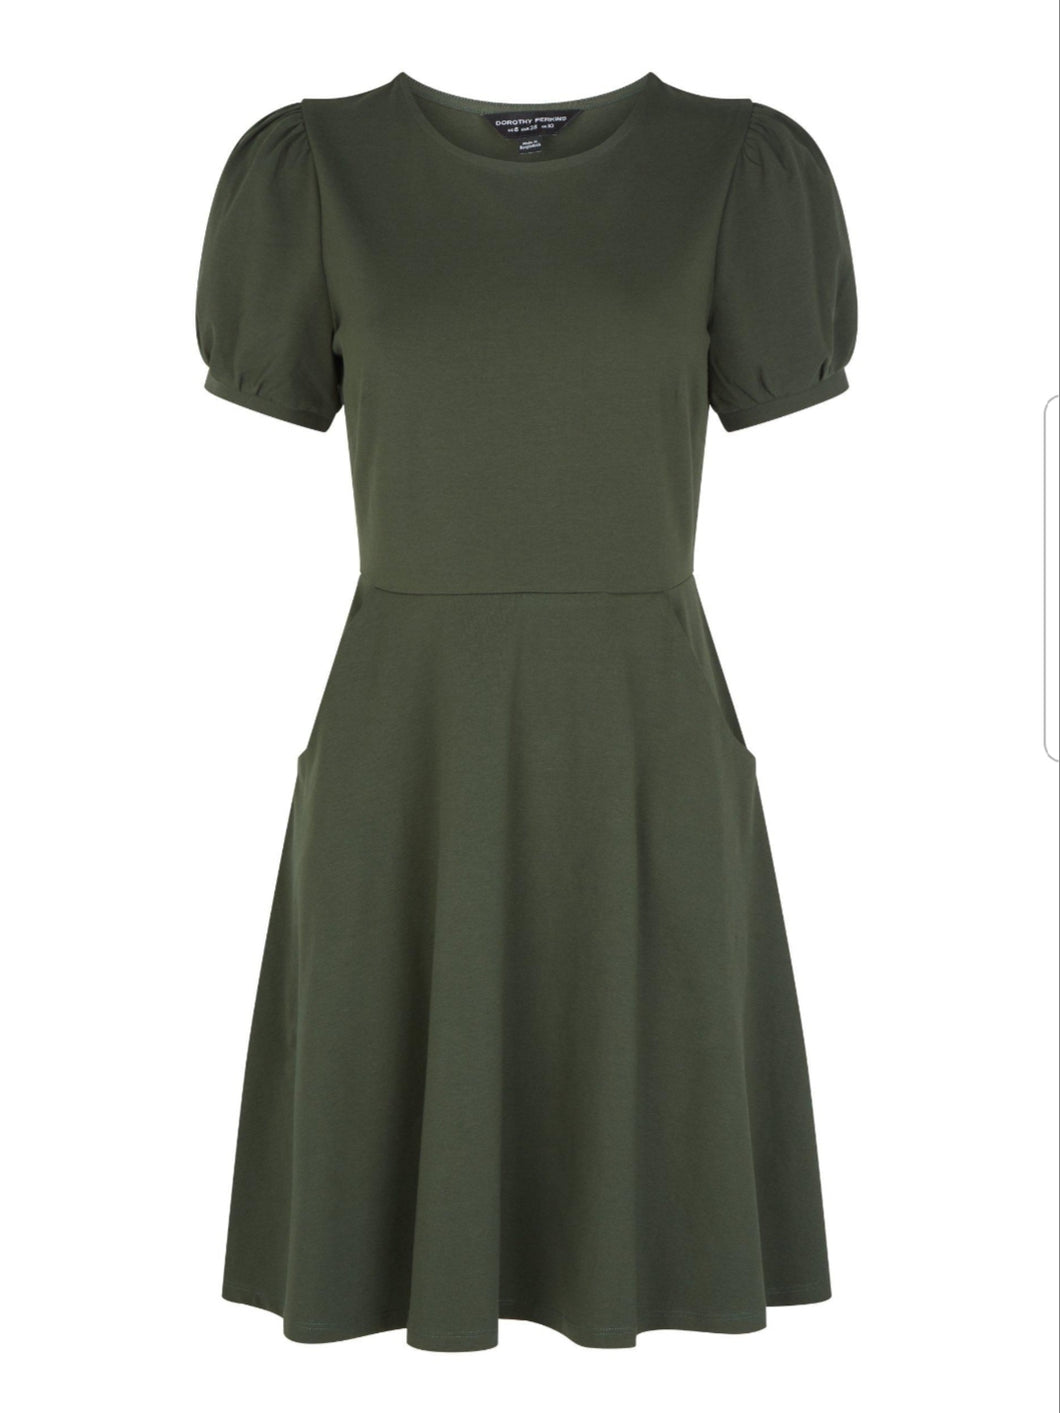 Khaki Dress with Puff Sleeves